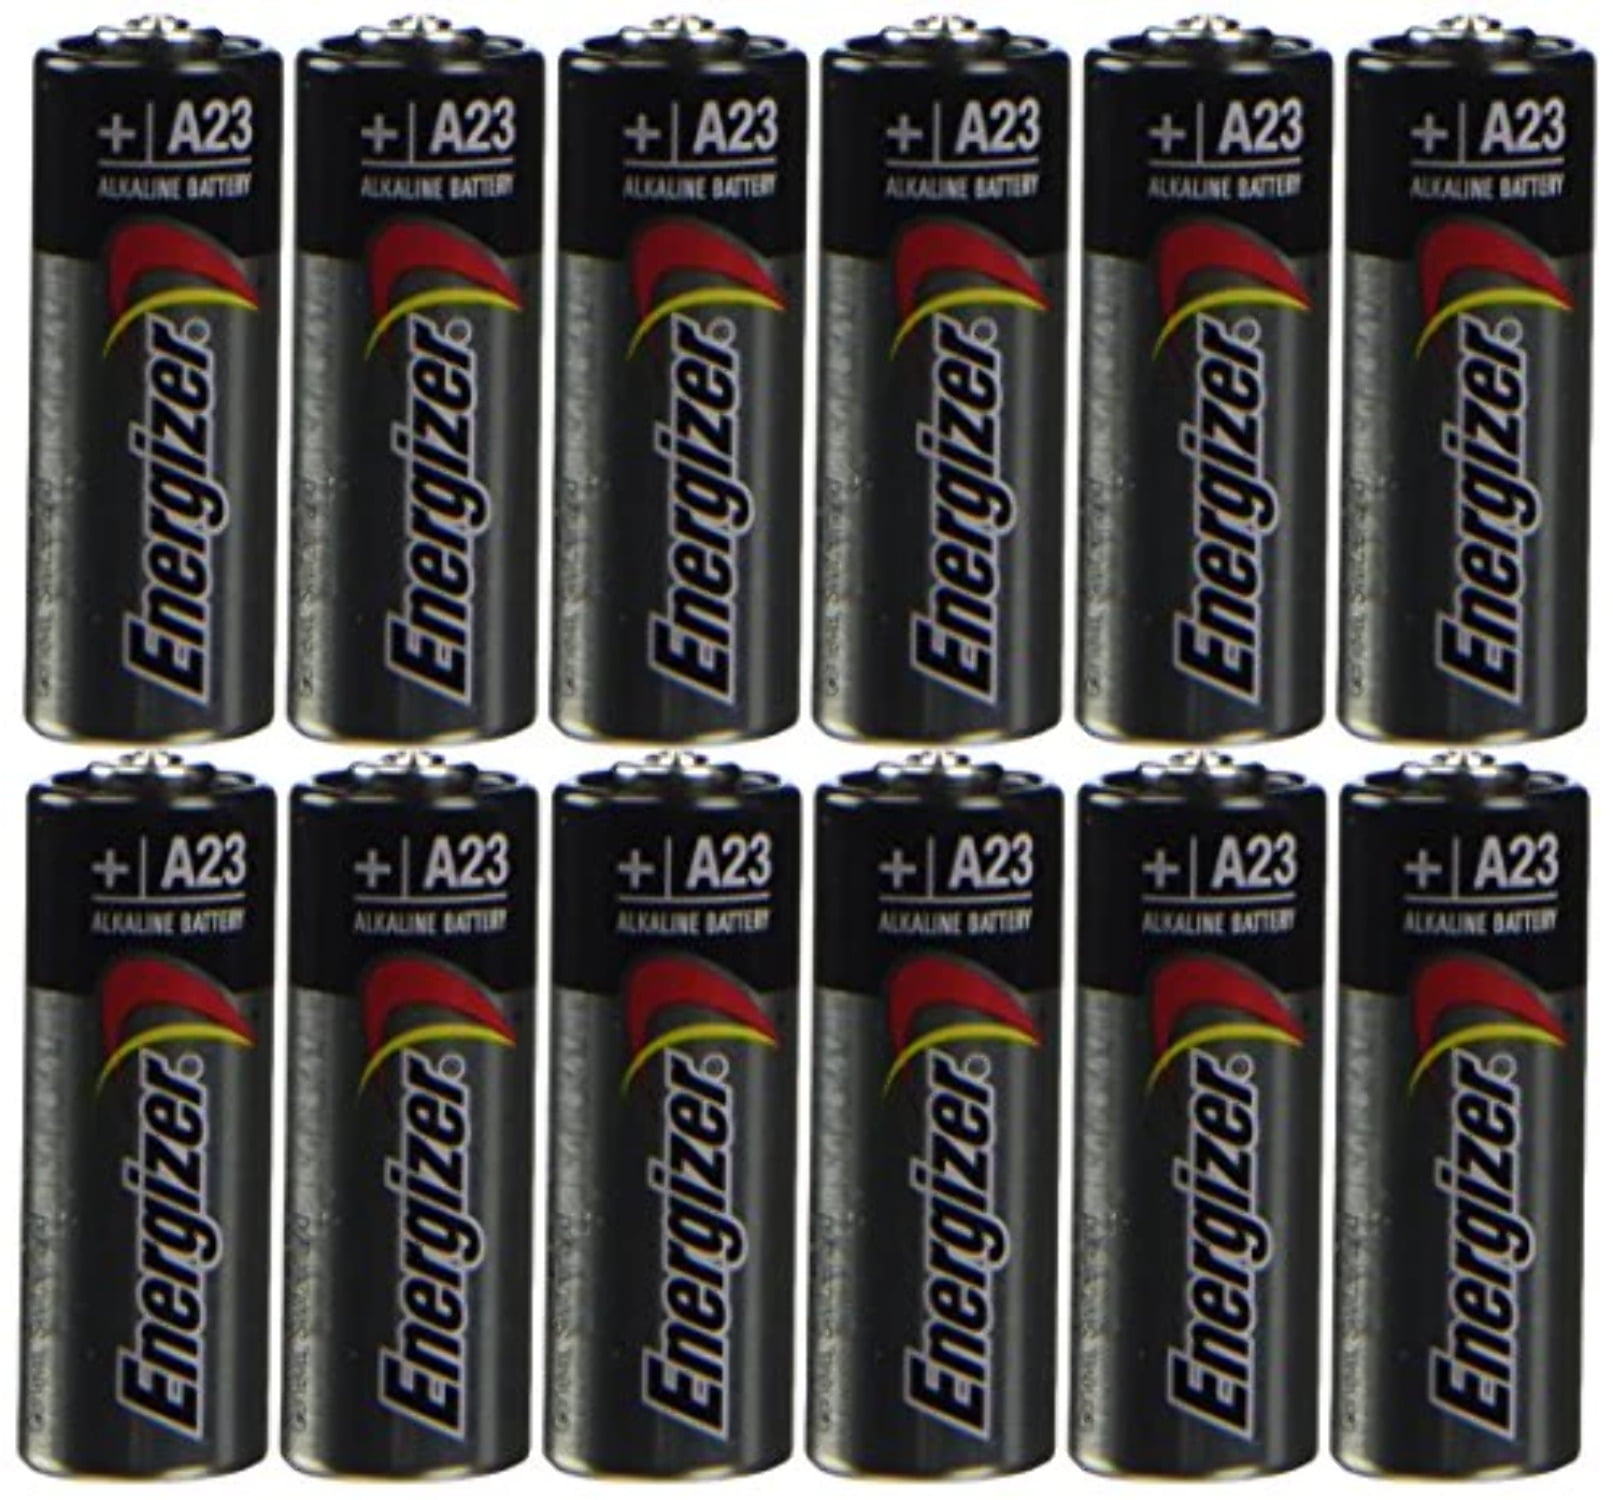 A23 Alkaline 12 Volt Battery 50 Pack + FREE SHIPPING! - Brooklyn Battery  Works